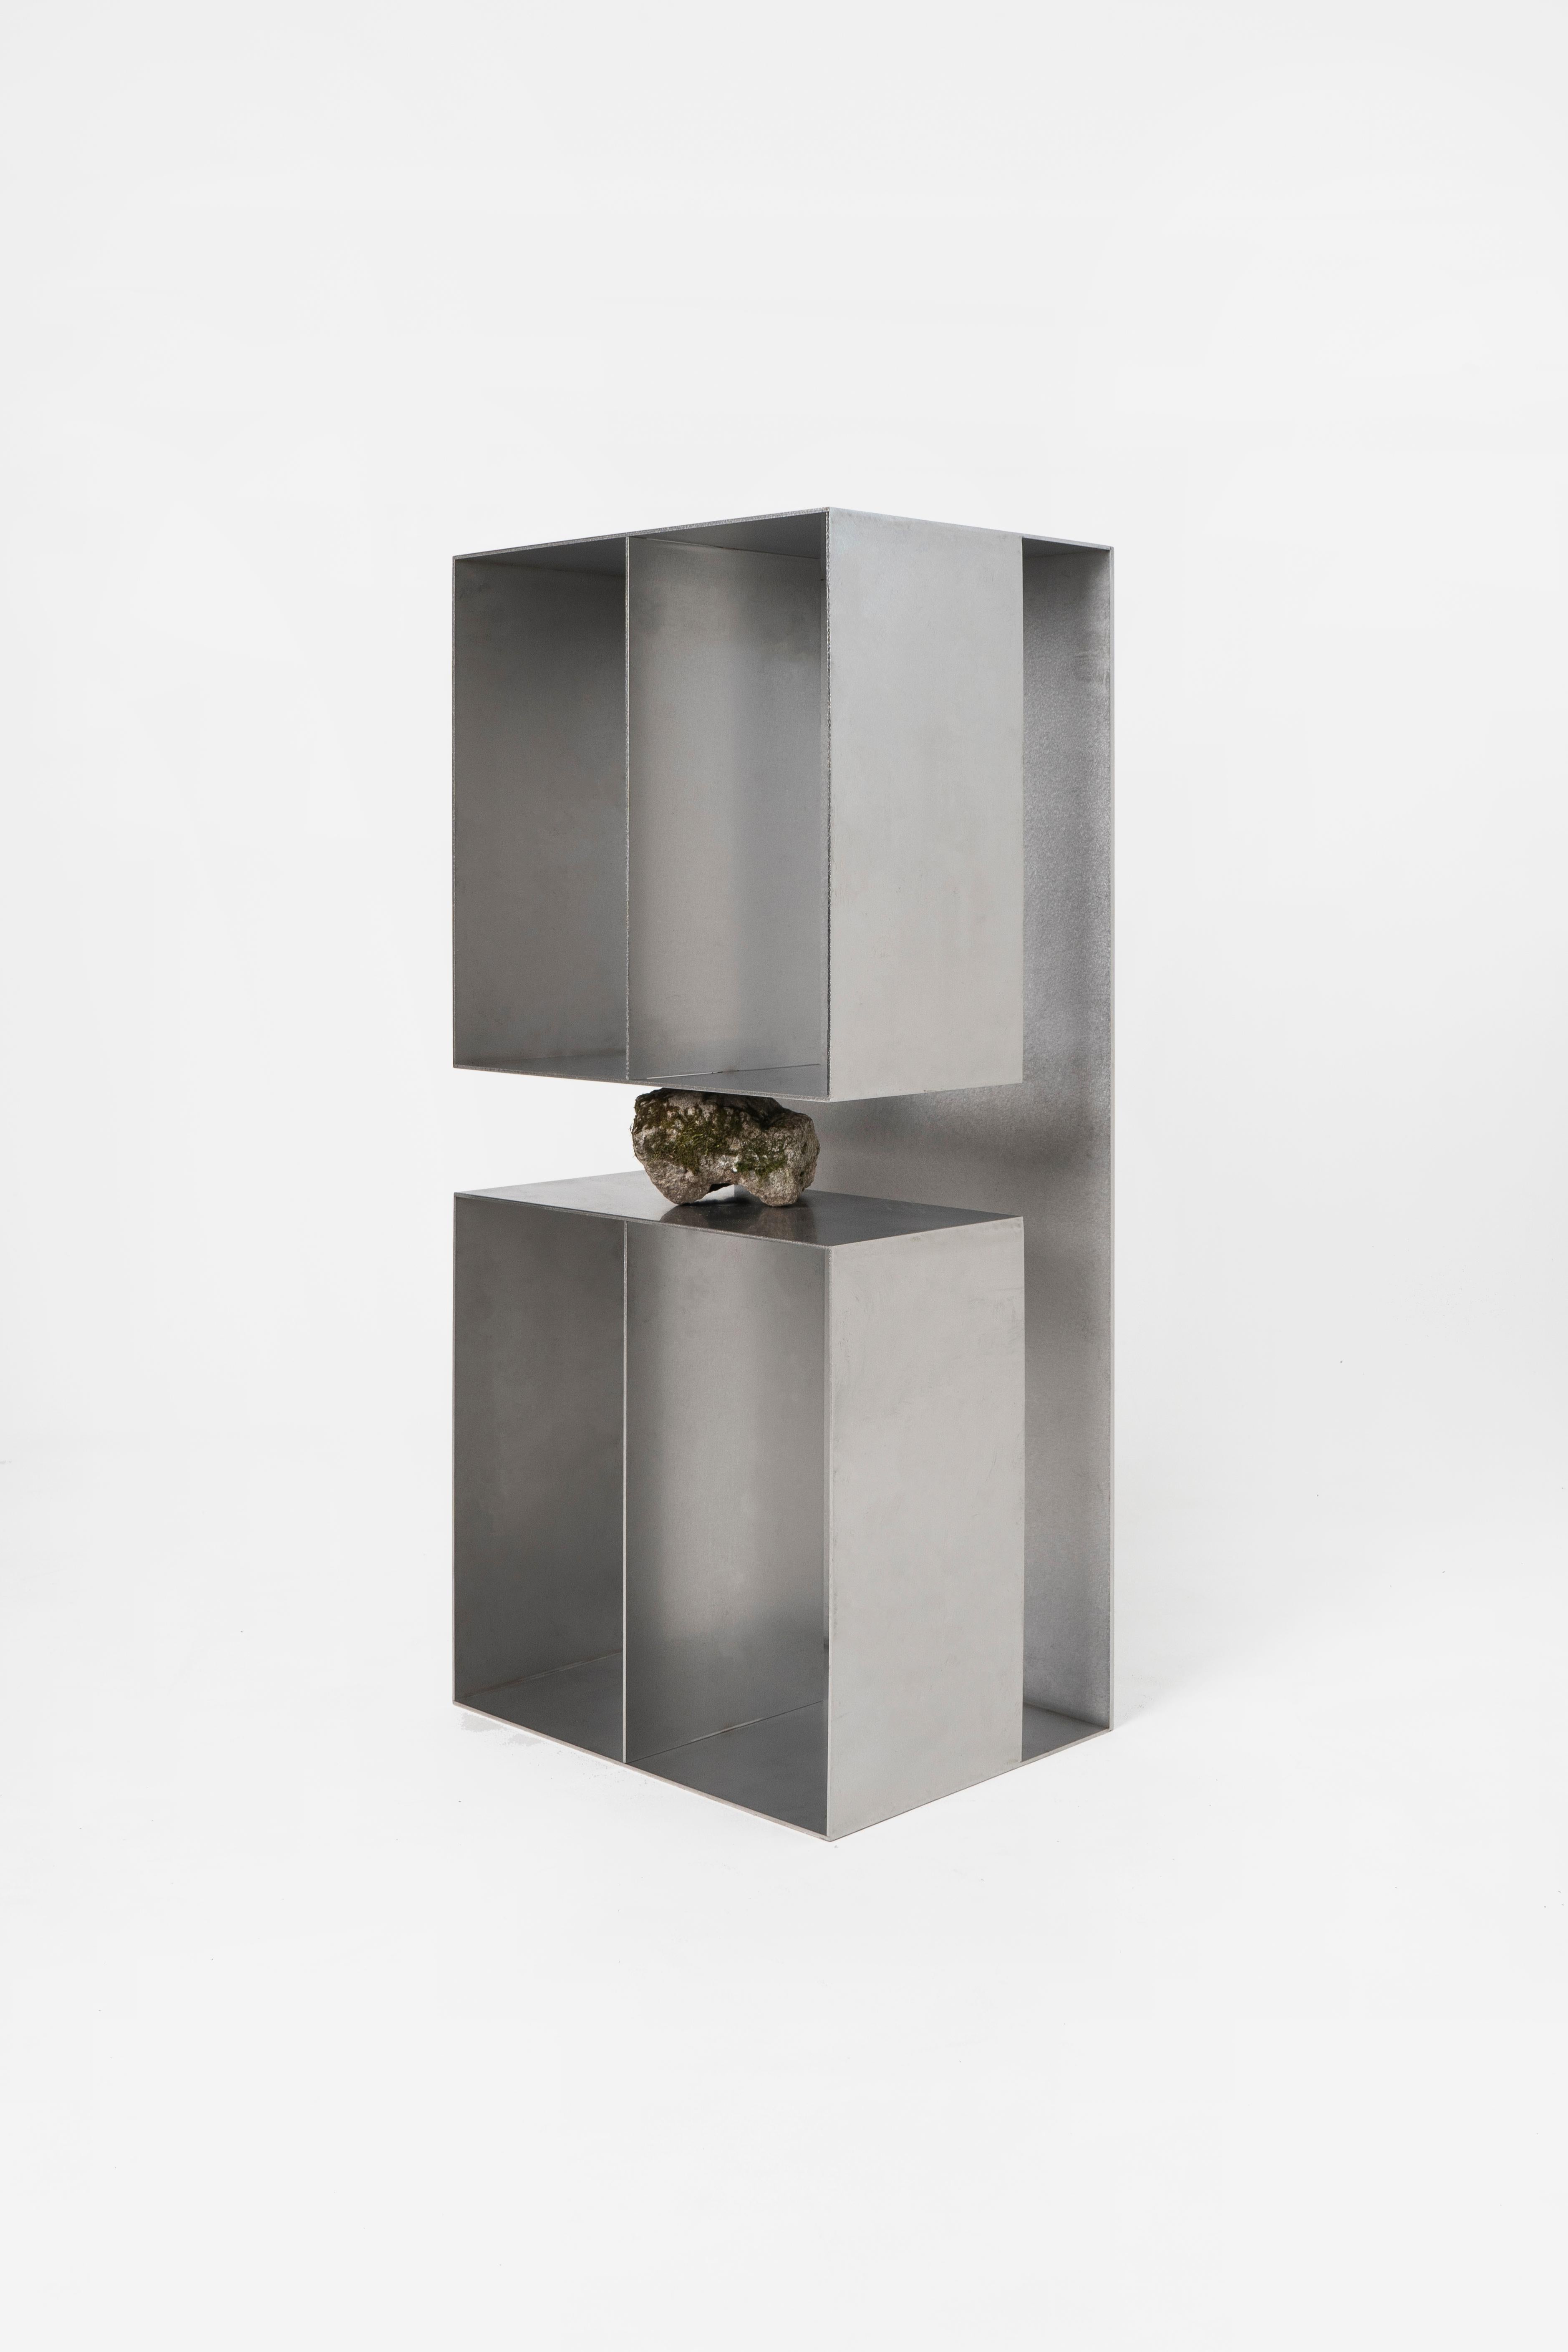 Proportions of stone shelf by Lee Sisan, 2020
Dimensions: W 36 x D 28 x H 80 cm
Materials: Stainless steel, natural stone

Each piece is made to order and uses natural stones, so please expect some variability in design.

